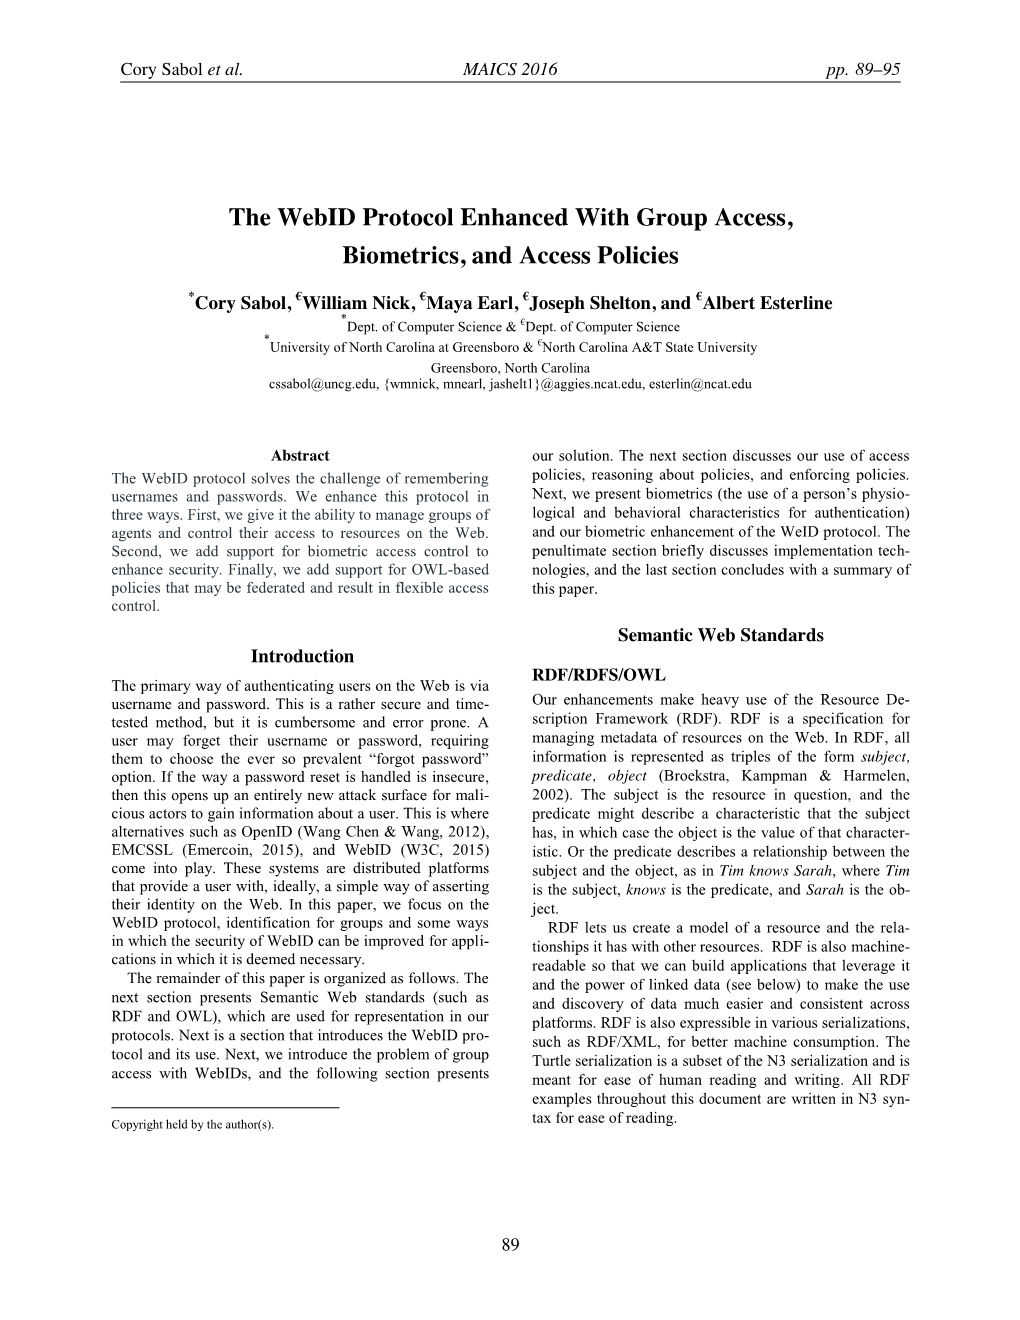 The Webid Protocol Enhanced with Group Access, Biometrics, and Access Policies